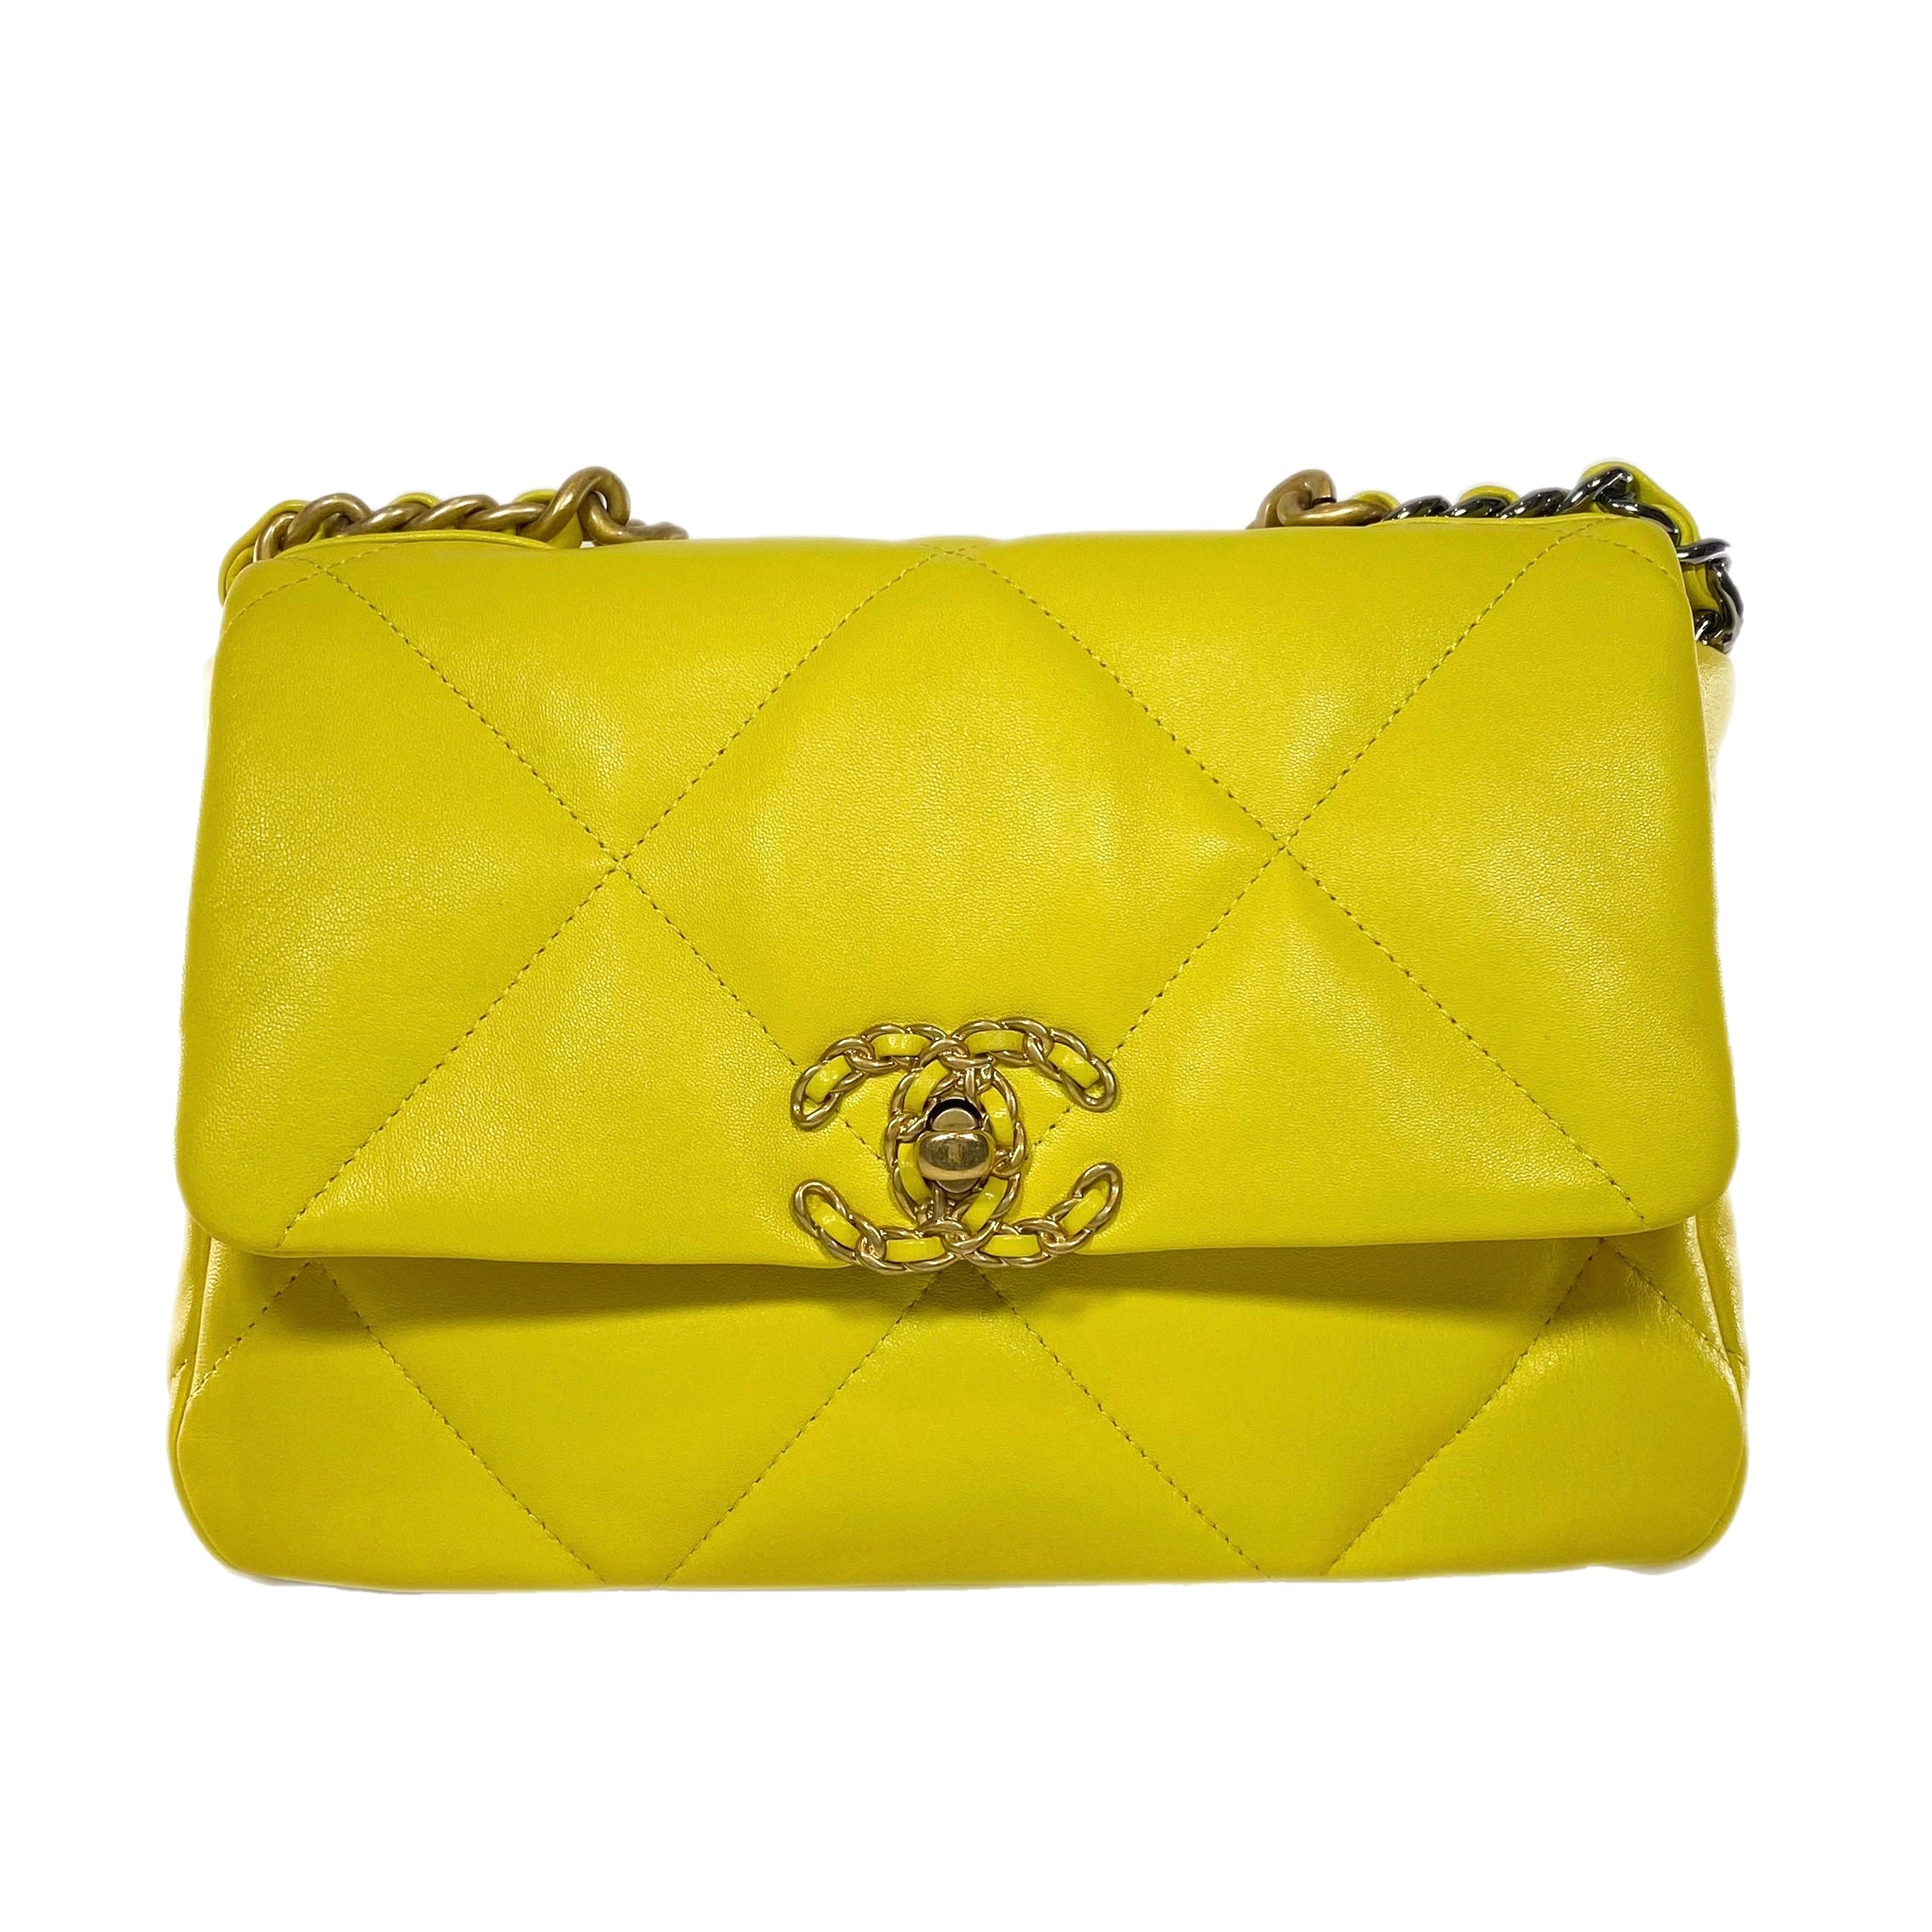 CHANEL Classic Double Flap Bag Quilted Yellow Leather